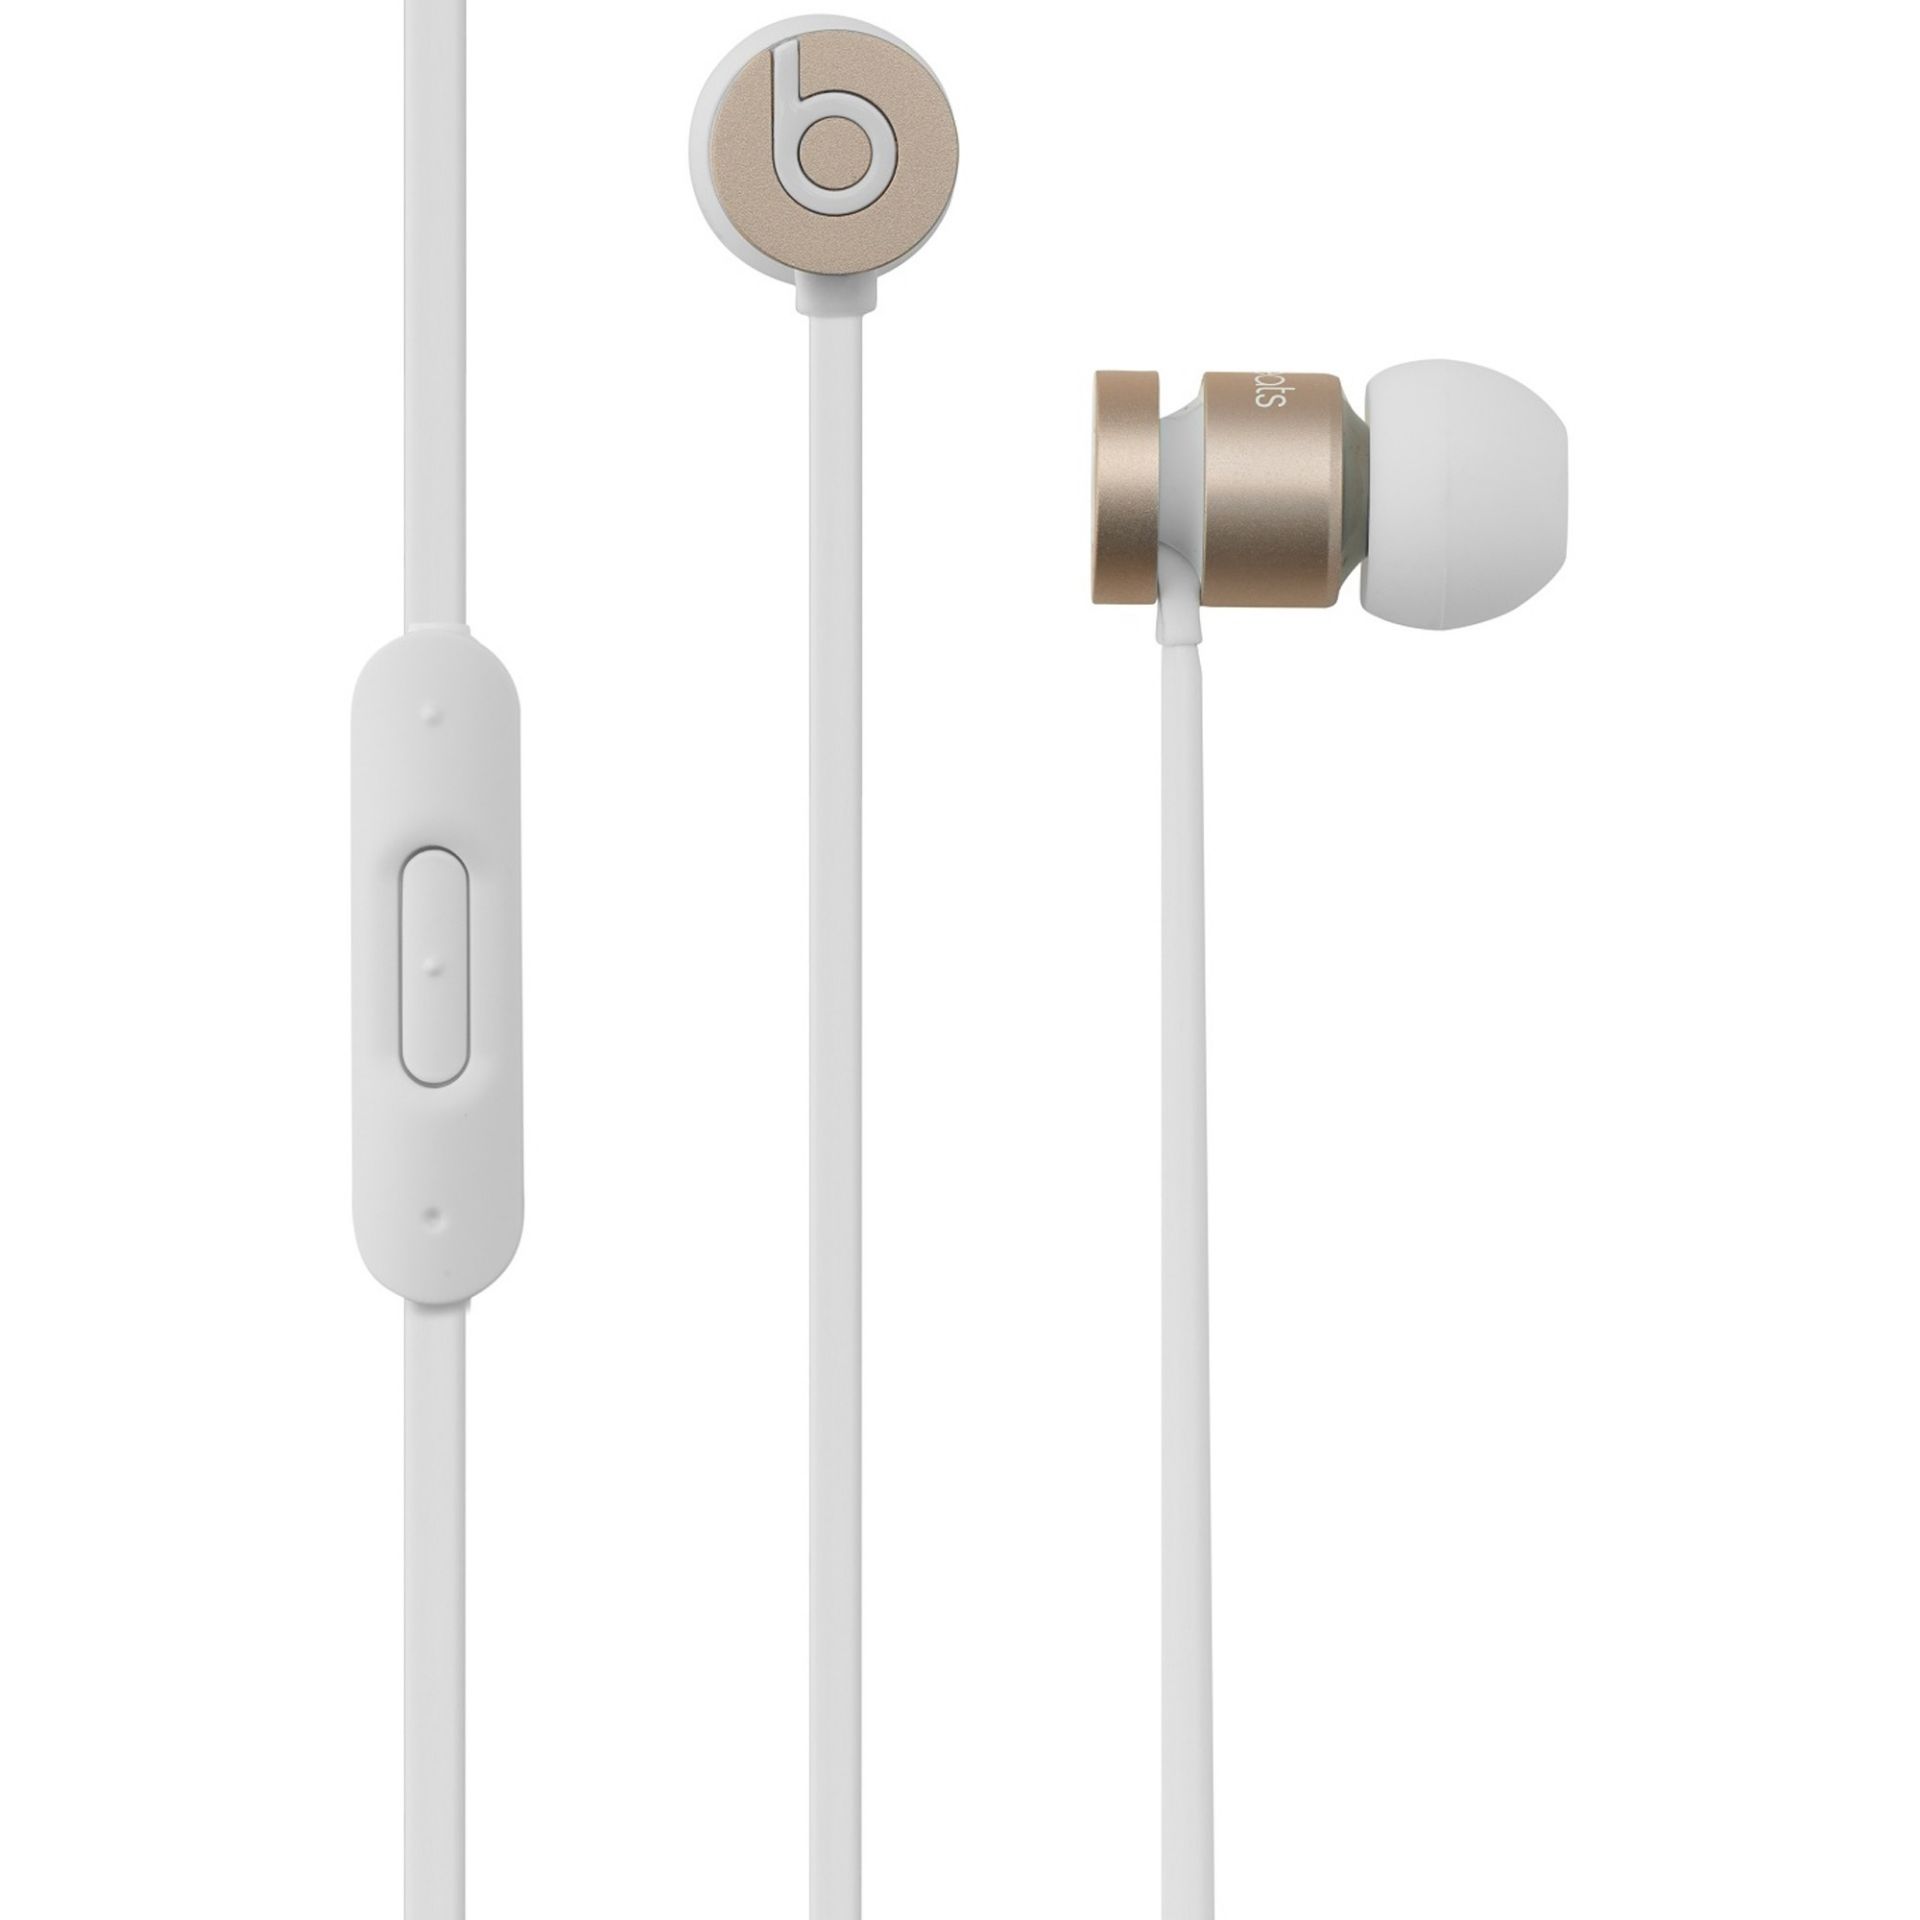 V Brand New Beats By Dr Dre urBeats Earphones - Gold- These are boxed and sealed - With Apple - Image 2 of 2